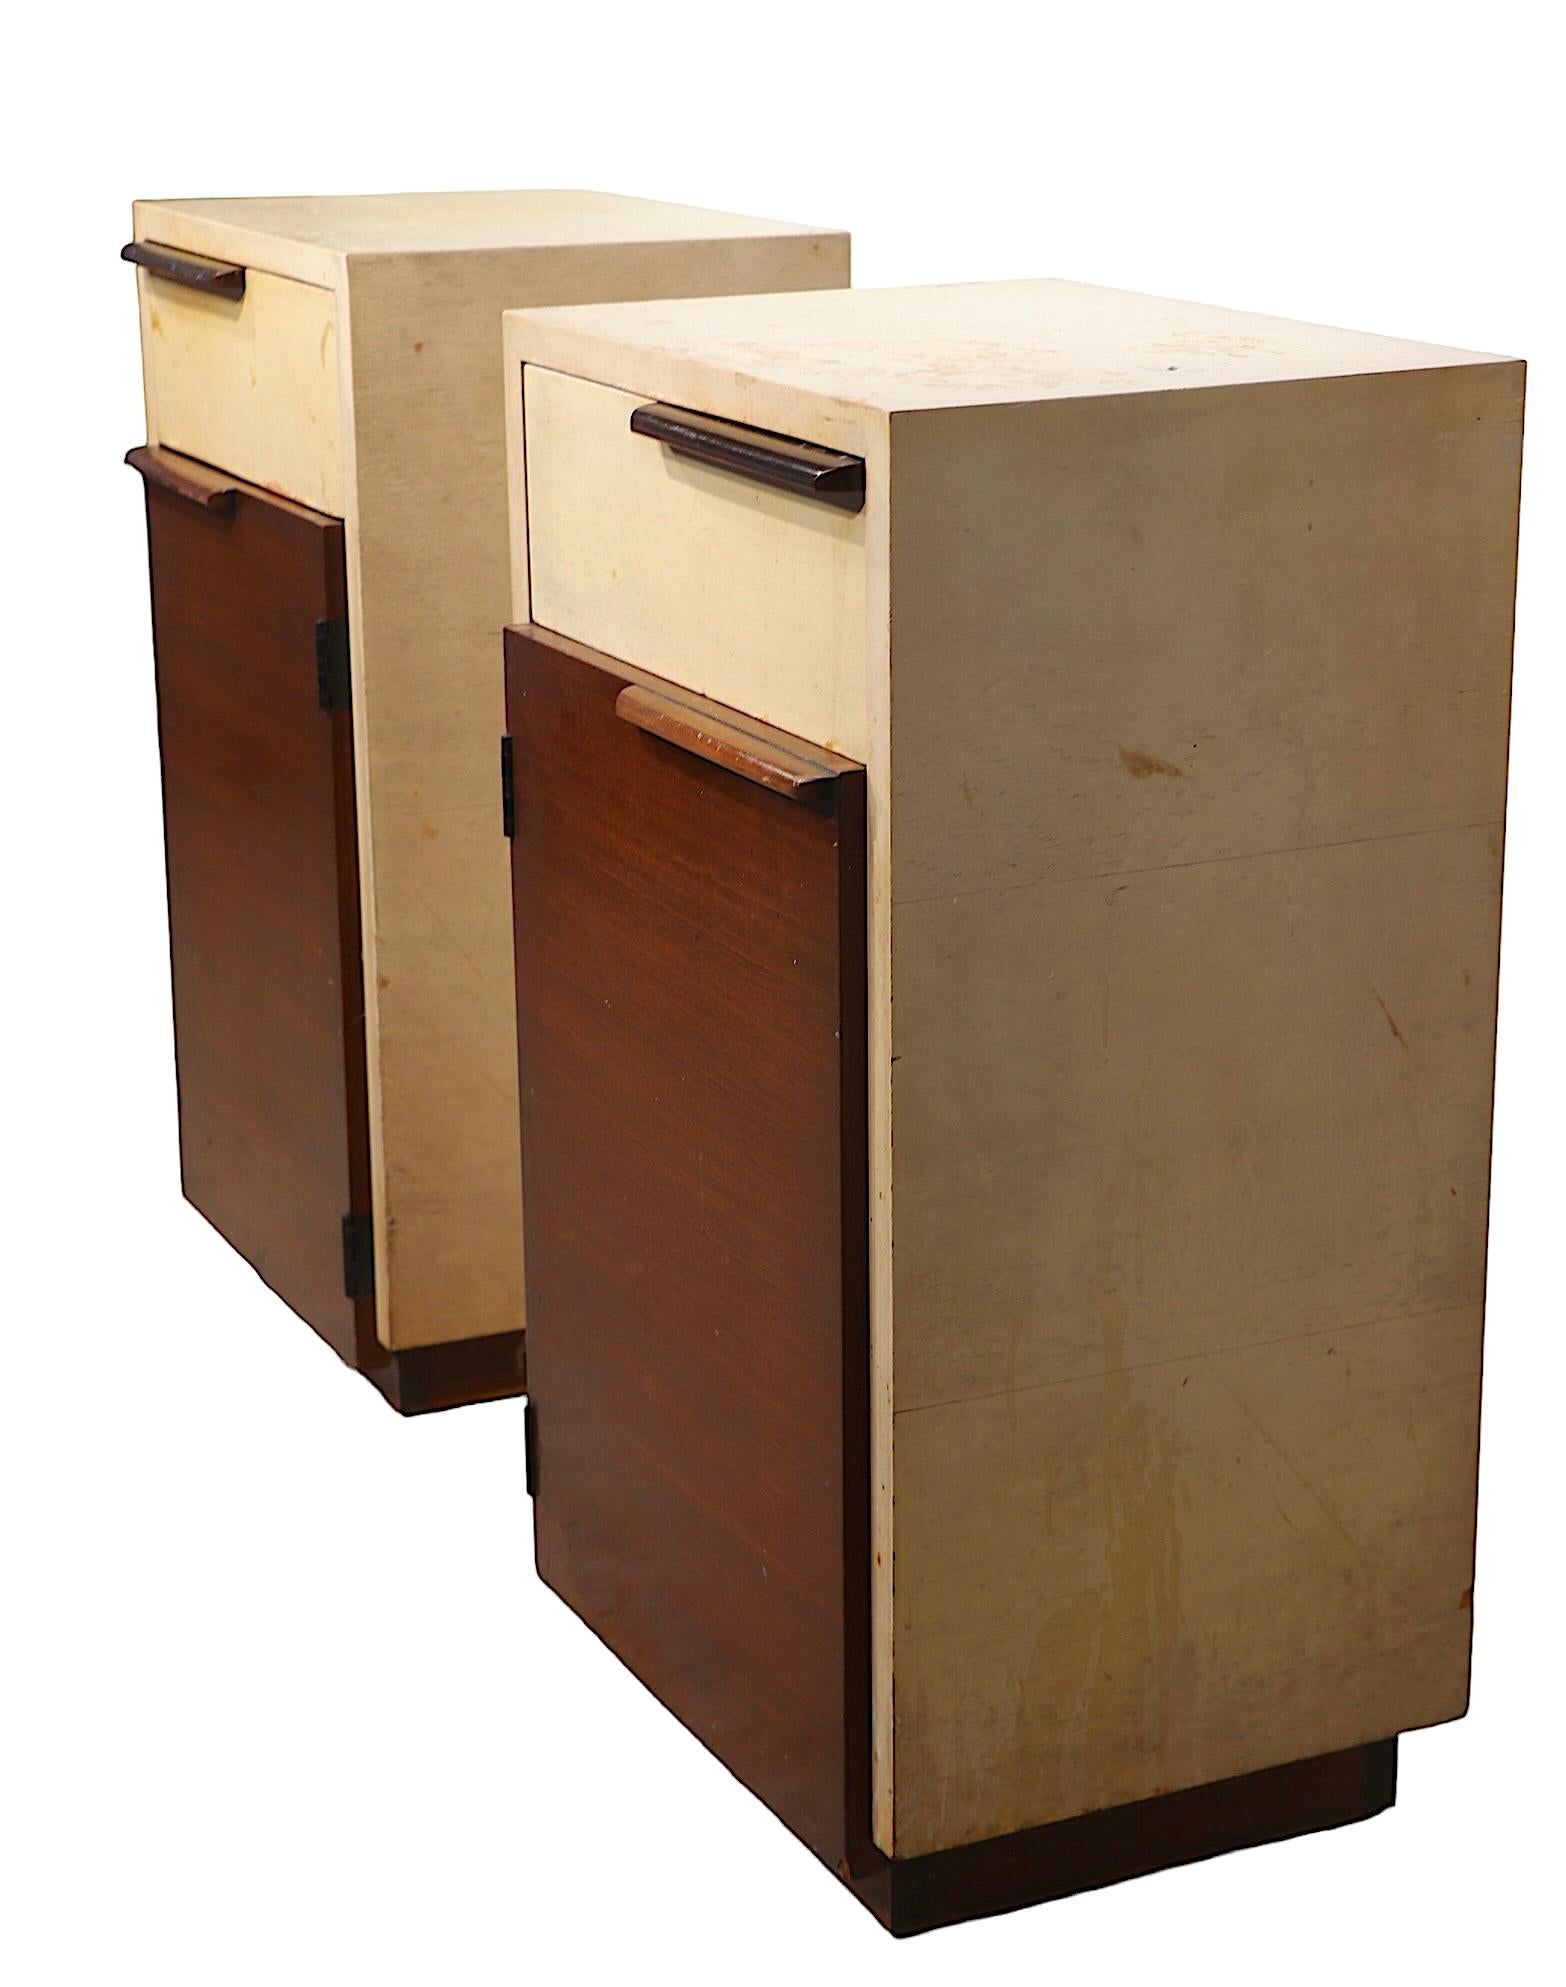 American Pr. Art Deco Art Moderne Two Tone Night Stand Tables by Rohde for Herman Miller 